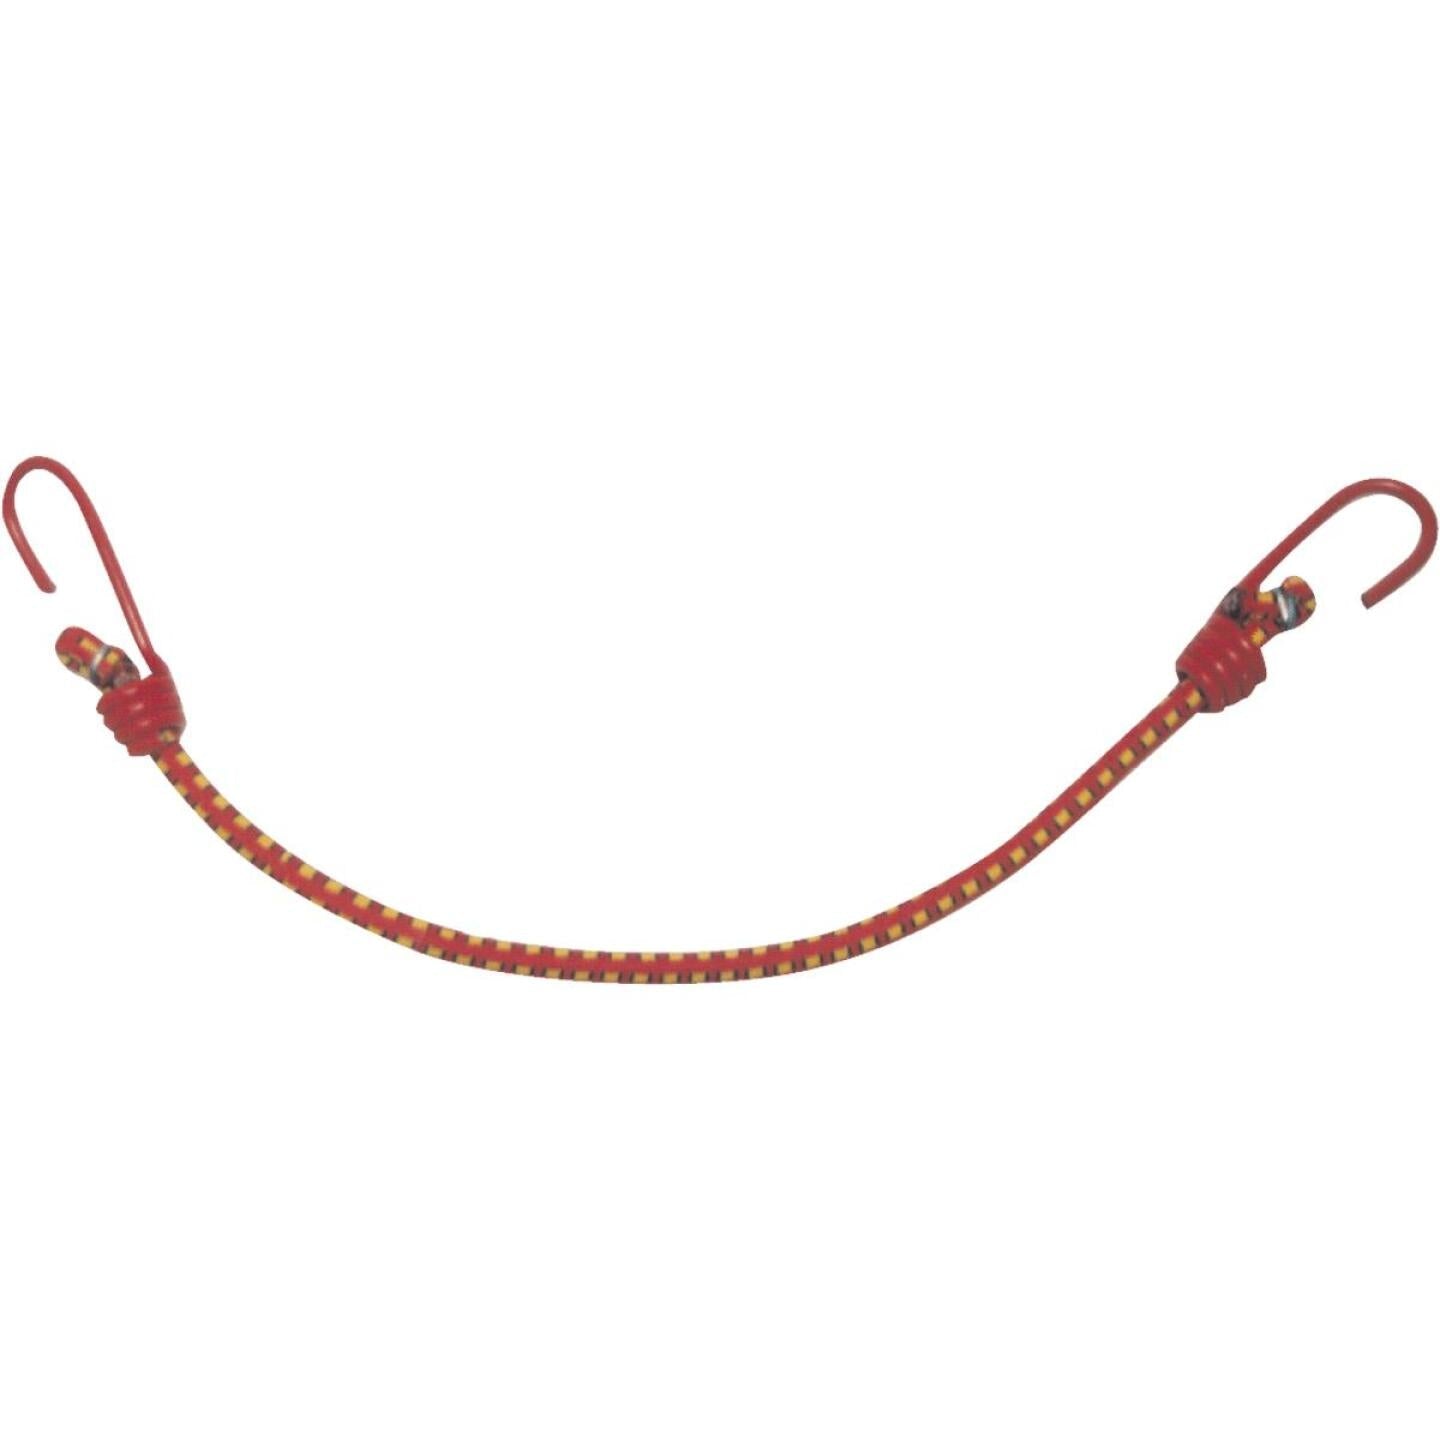 Erickson, Erickson 1/4 In. x 18 In. Bungee Cord, Assorted Colors